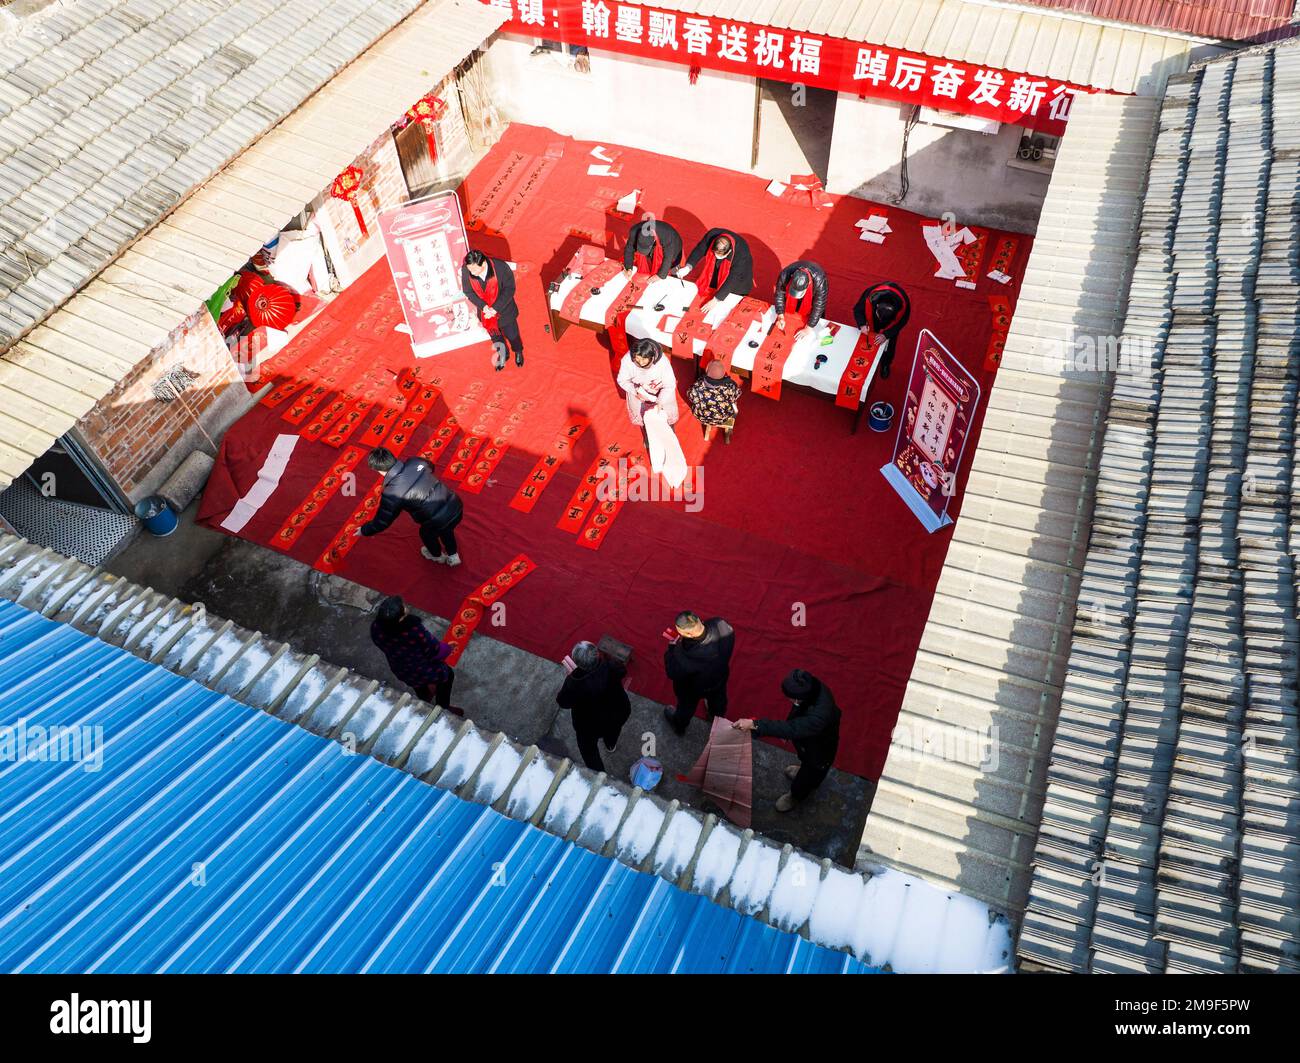 SUQIAN, CHINA - JANUARY 18, 2023 - Calligraphers wrote couplets to citizens to celebrate the lunar Year of the Rabbit. January 18, 2023, Suqian City, Stock Photo